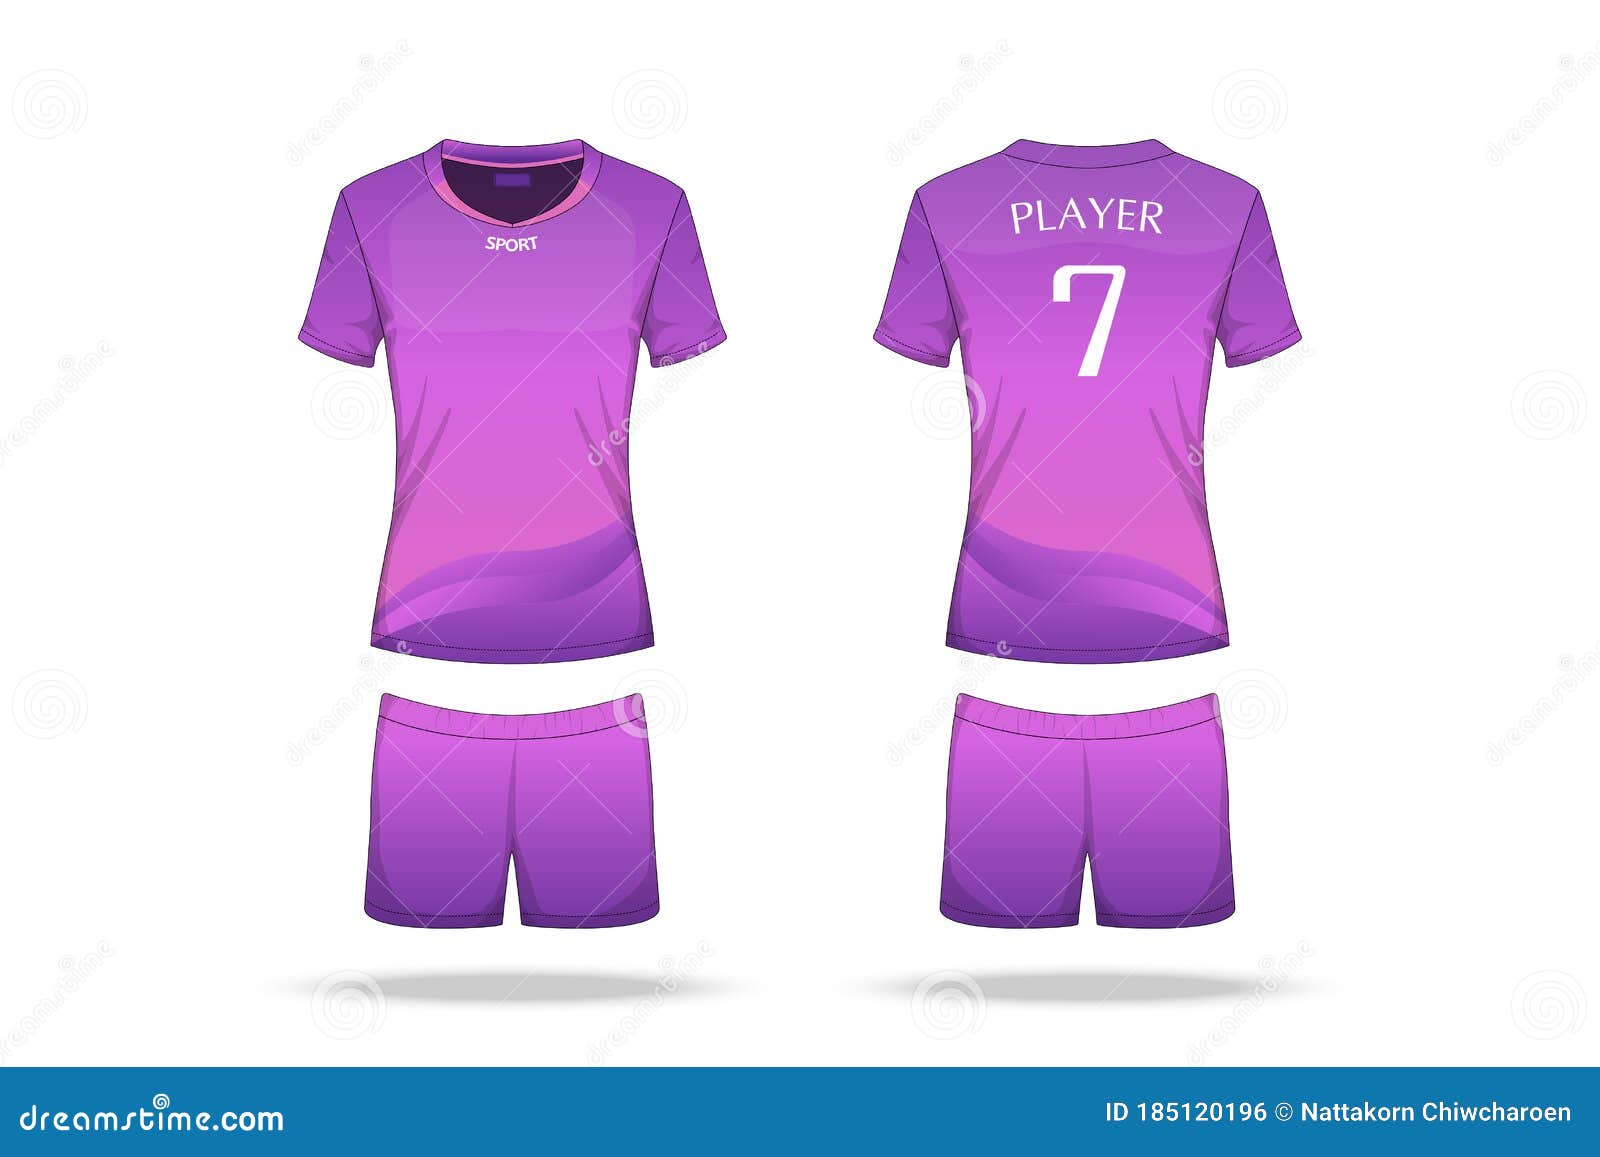 Download Specification Volleyball Jersey Isolated On White ...